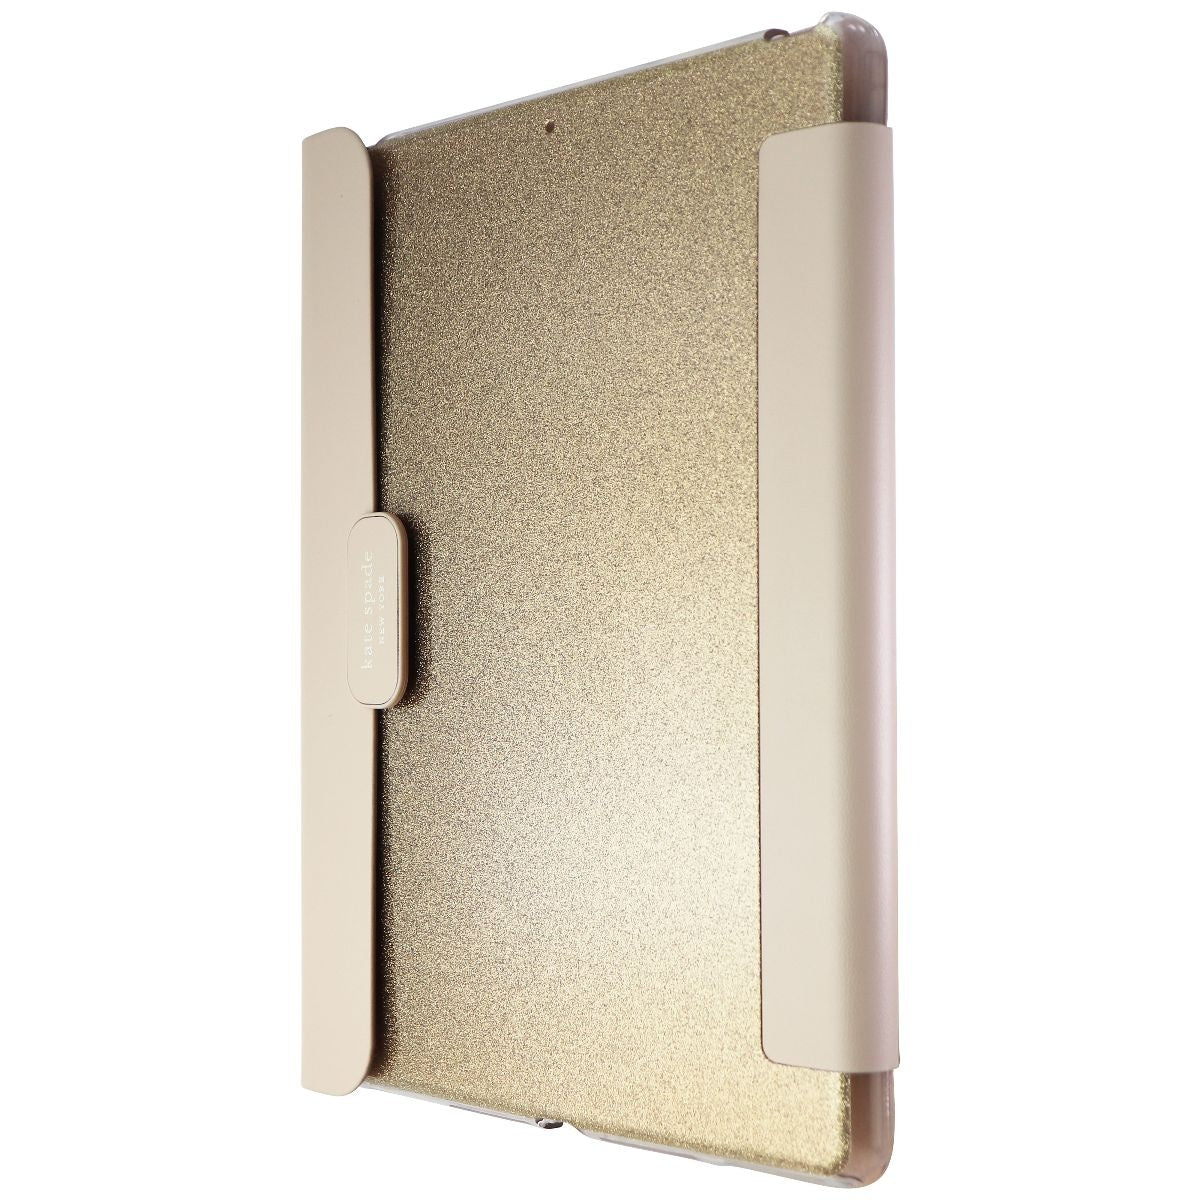 Kate Spade Protective Folio for iPad 9 / 8 / 7 Gen (10.2-in) - Gold Glitter iPad/Tablet Accessories - Cases, Covers, Keyboard Folios Kate Spade    - Simple Cell Bulk Wholesale Pricing - USA Seller